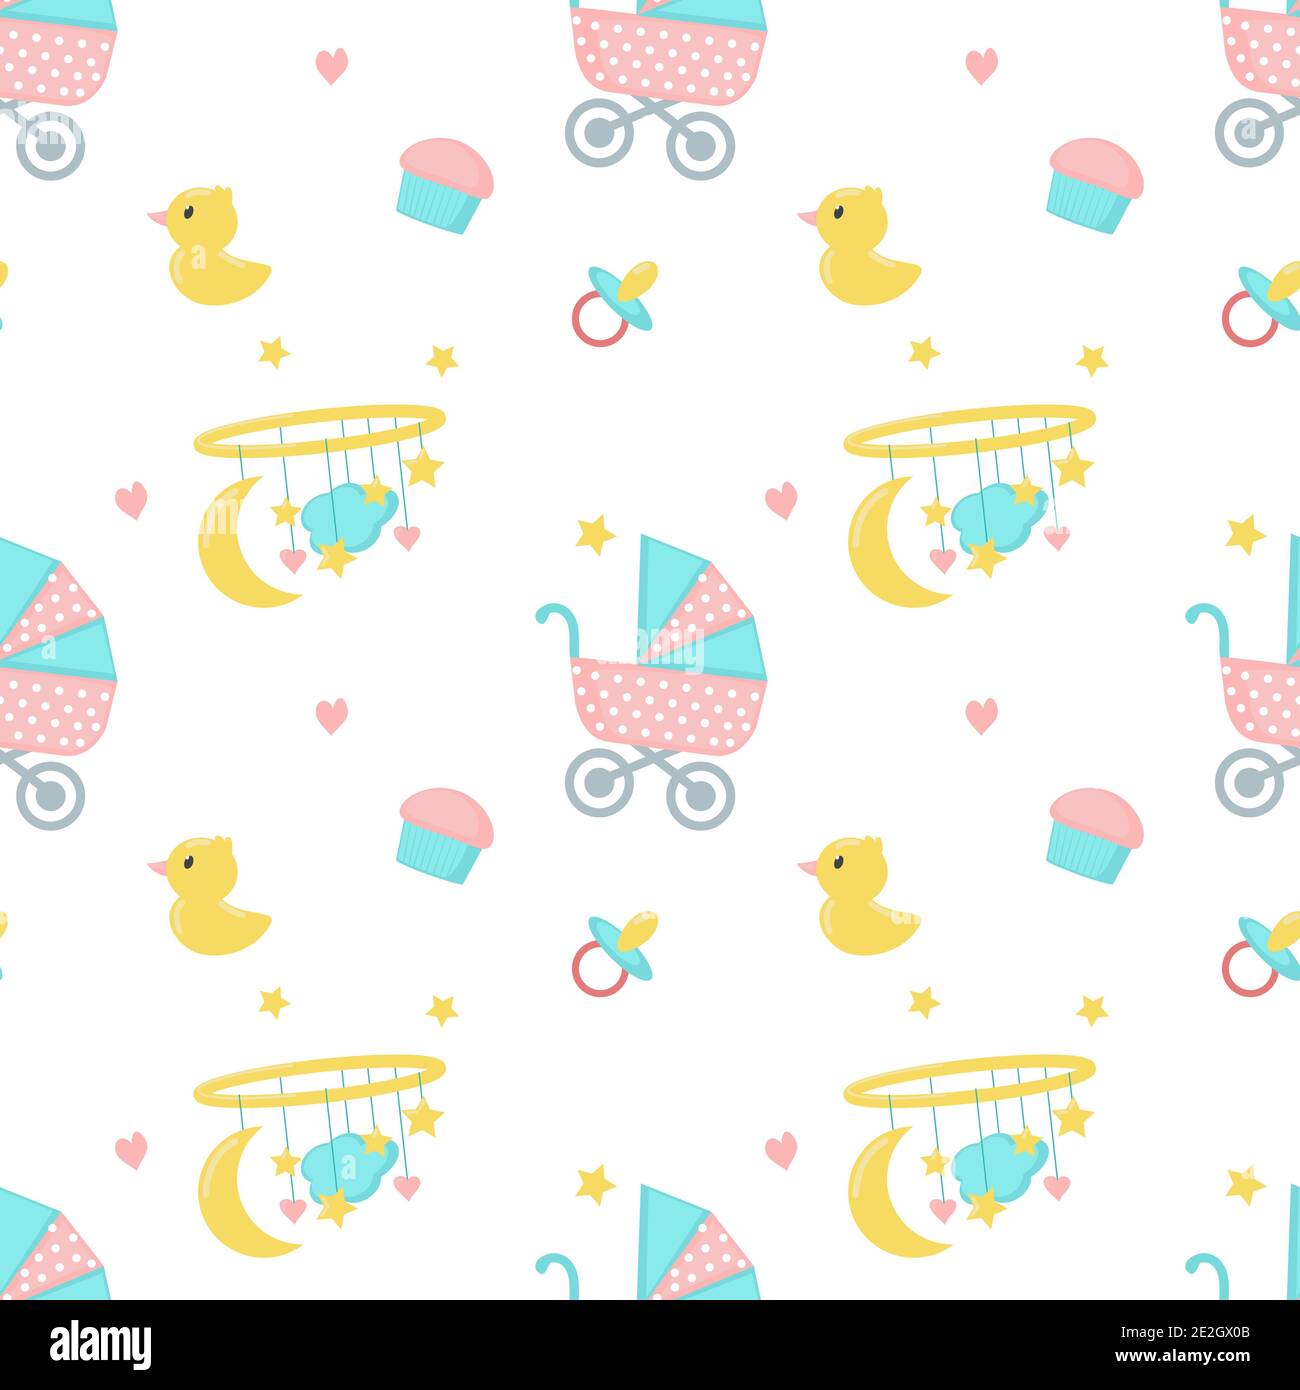 Vintage Baby Shower Wrapping Paper Digital Image Download Printable Unisex  Baby Dear Newborn Baby Gift